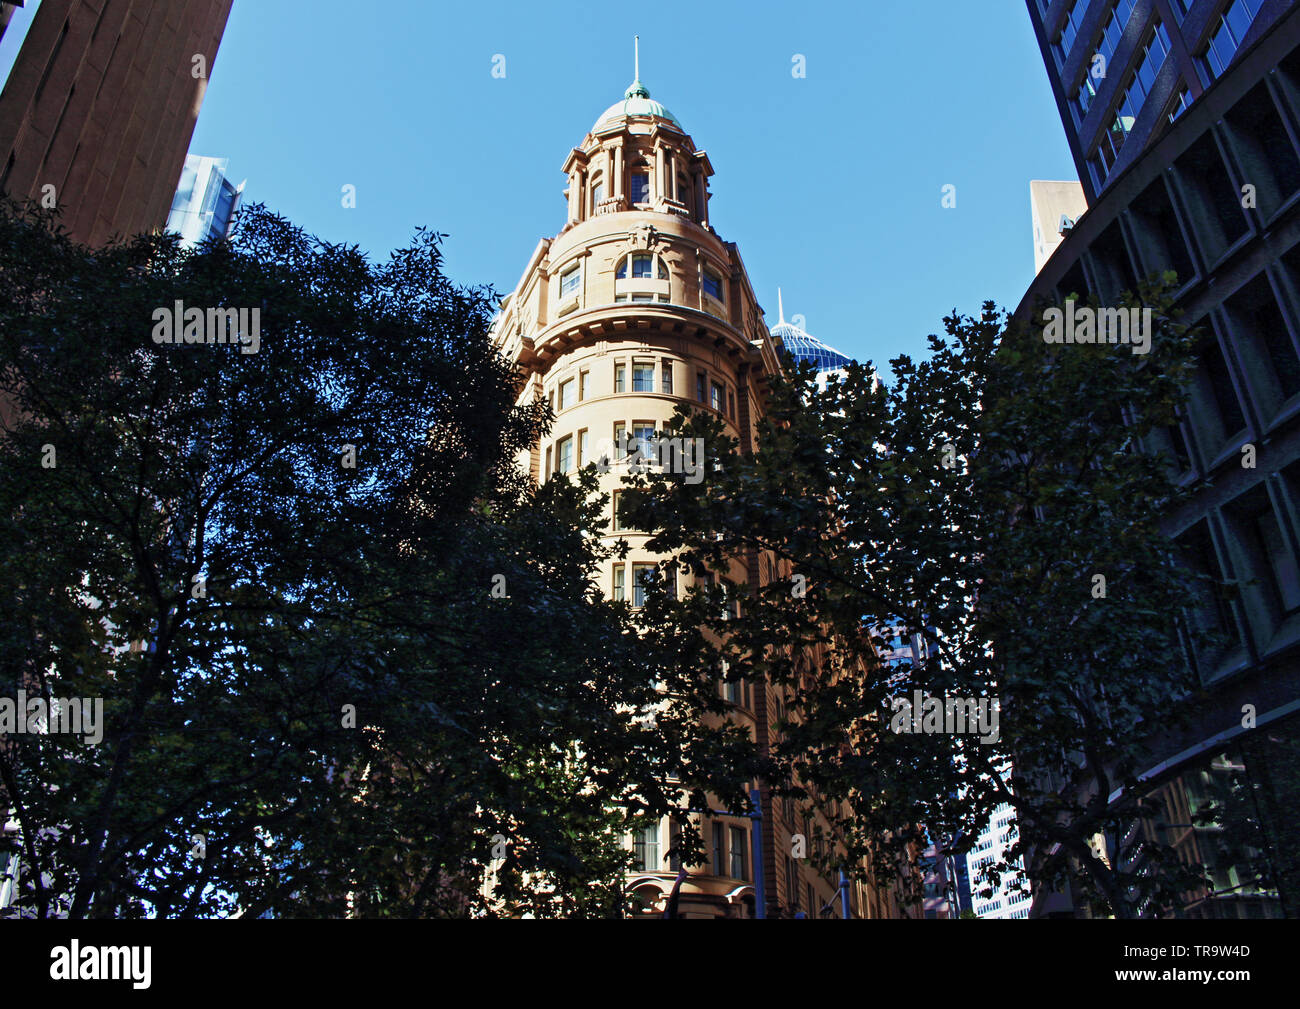 O'Connell St Canyon - Sydney city at beautiful old stone building now used as Radisson Blu Plaza Hotel Stock Photo